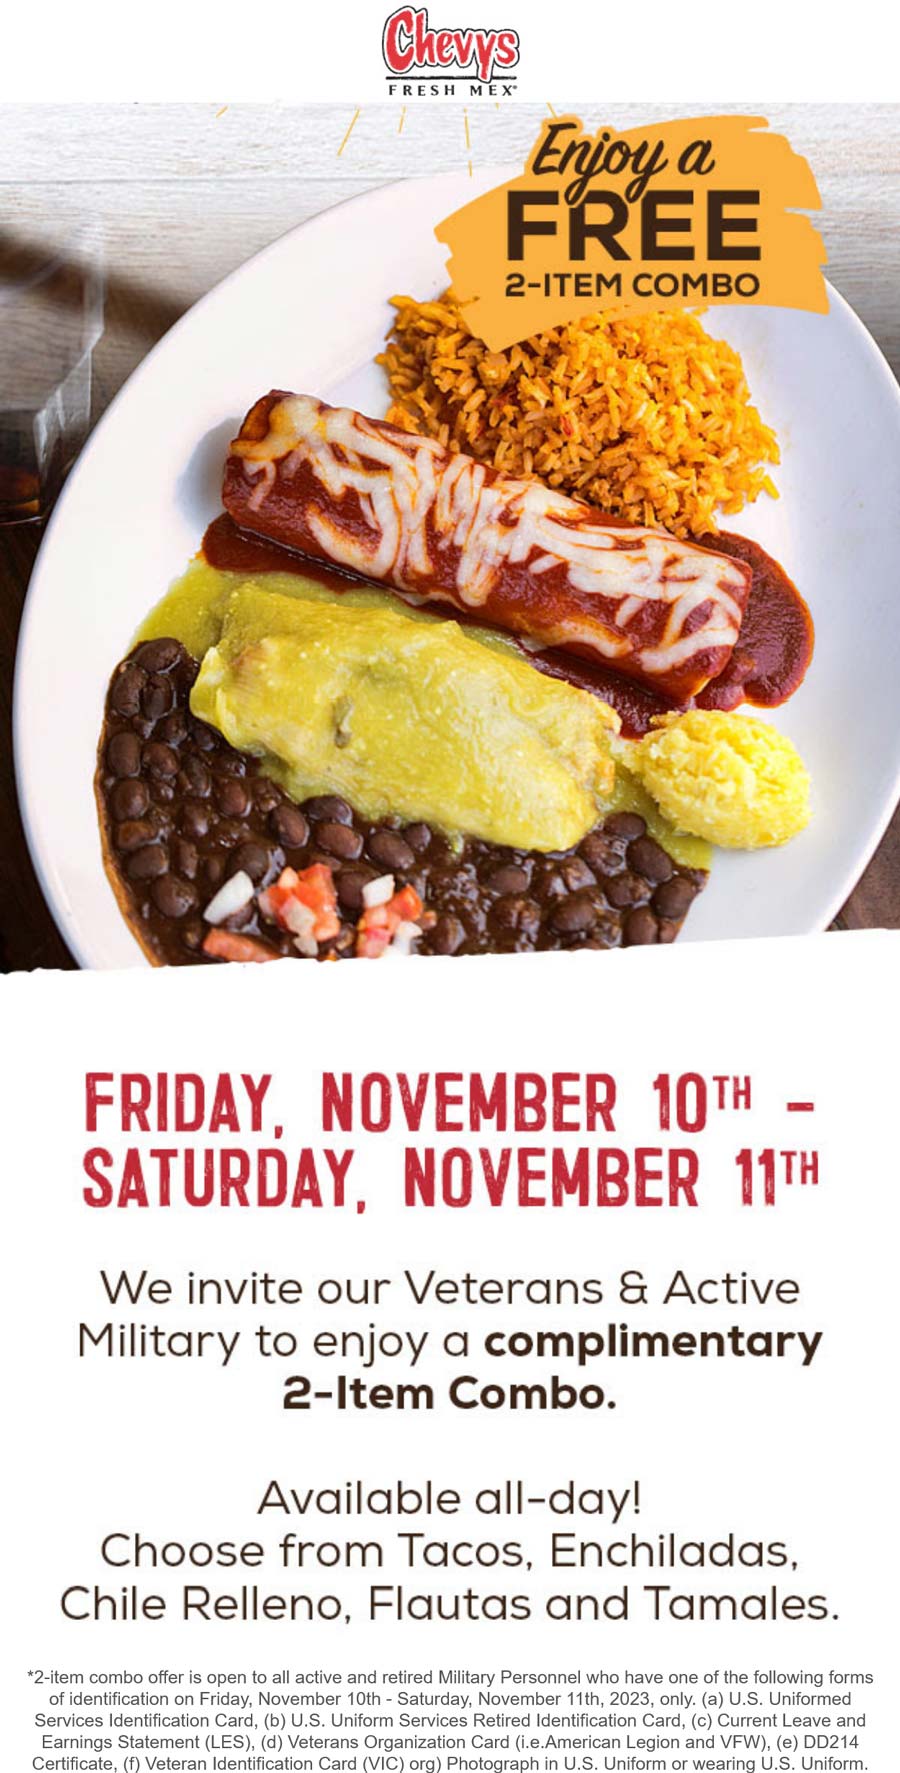 Chevys restaurants Coupon  Active & retired military enjoy a free 2-item combo meal thru Saturday at Chevys Fresh Mex #chevys 